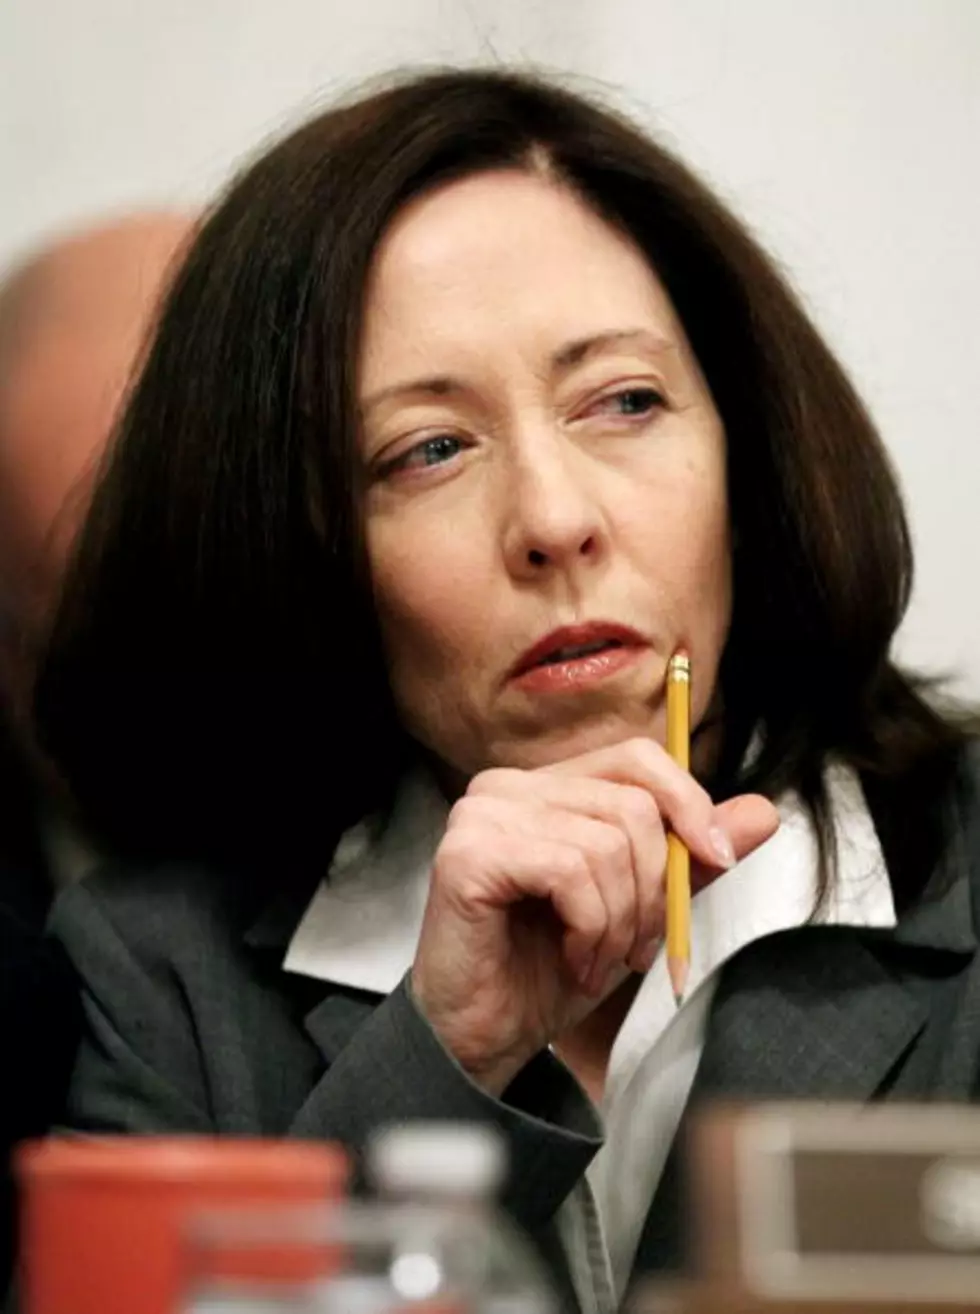 Senator Cantwell Demands Investigation of Gas Price Spikes